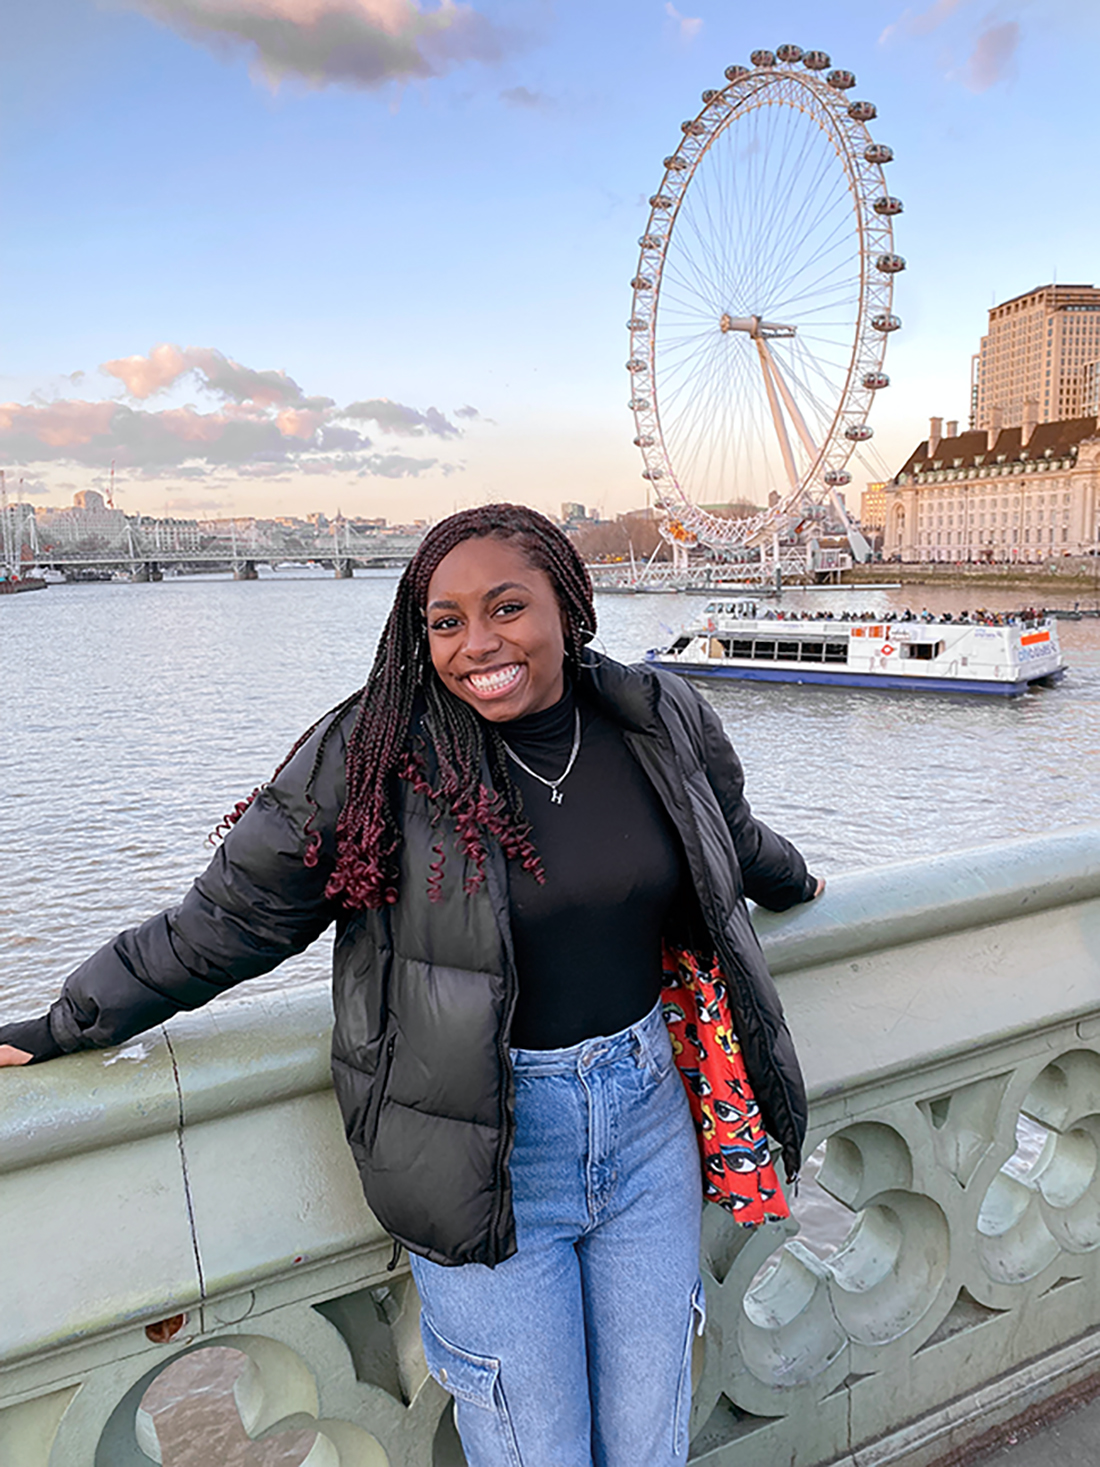 Hailey Williams in front of London Eye.